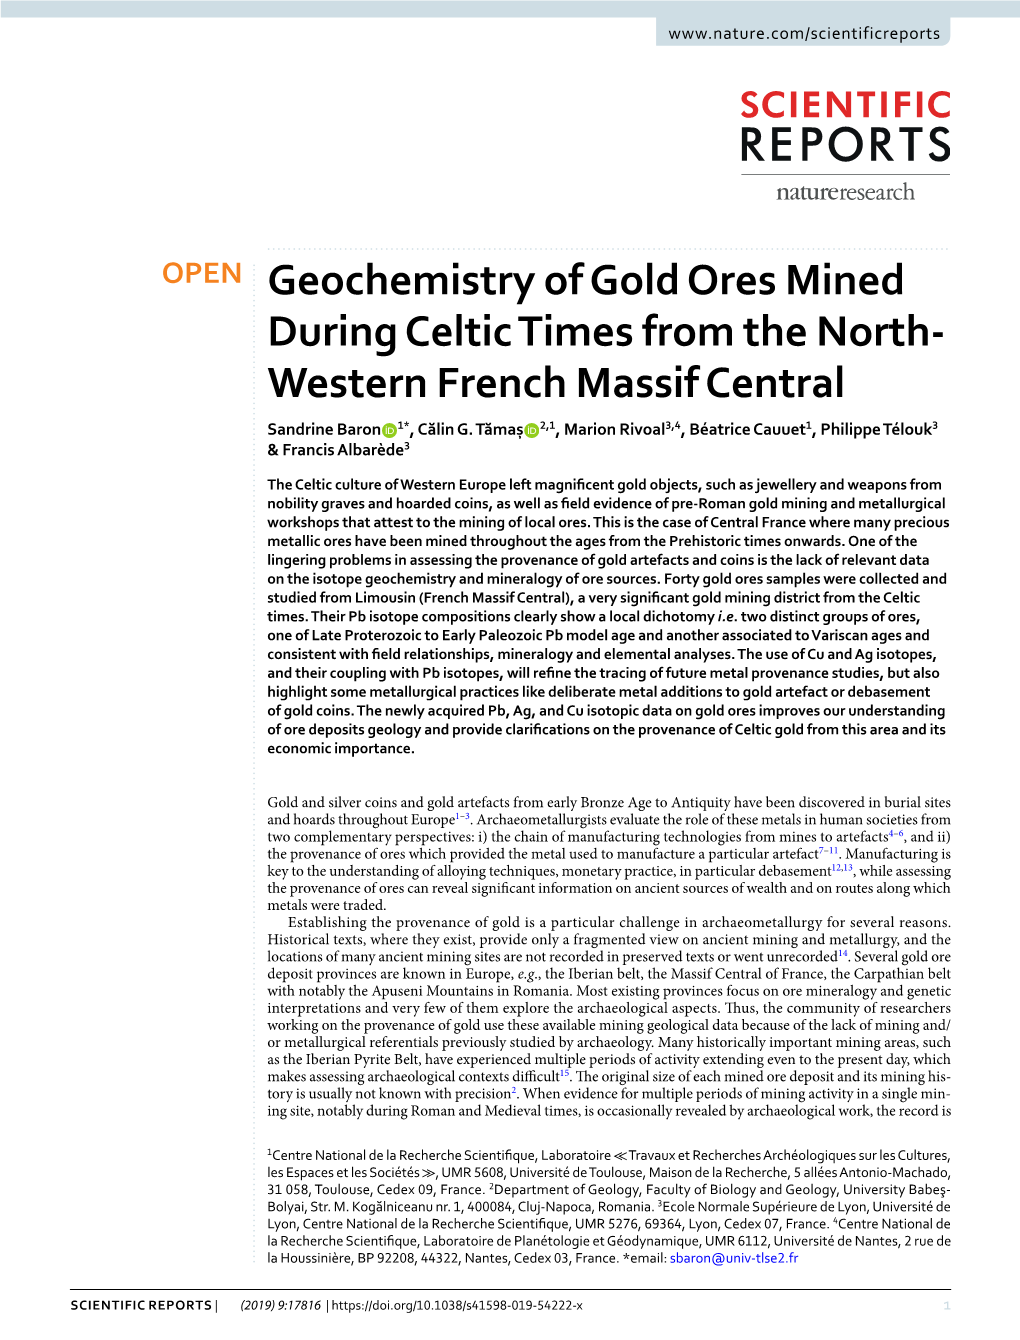 Geochemistry of Gold Ores Mined During Celtic Times from the North- Western French Massif Central Sandrine Baron 1*, Călin G